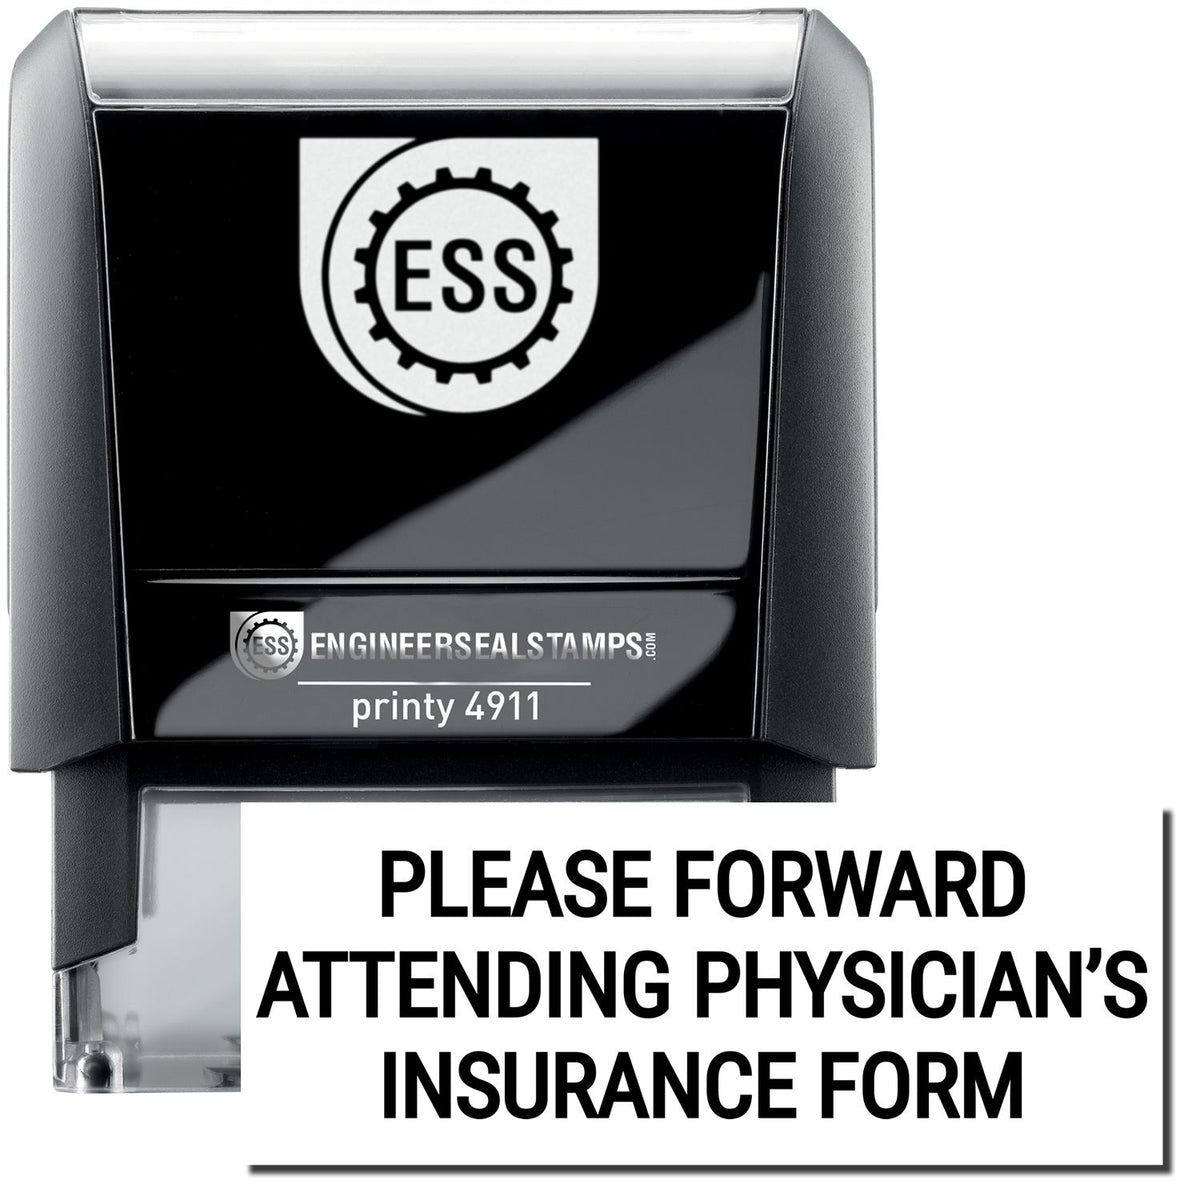 A self-inking stamp with a stamped image showing how the text &quot;PLEASE FORWARD ATTENDING PHYSICIAN&#39;S INSURANCE FORM&quot; is displayed after stamping.